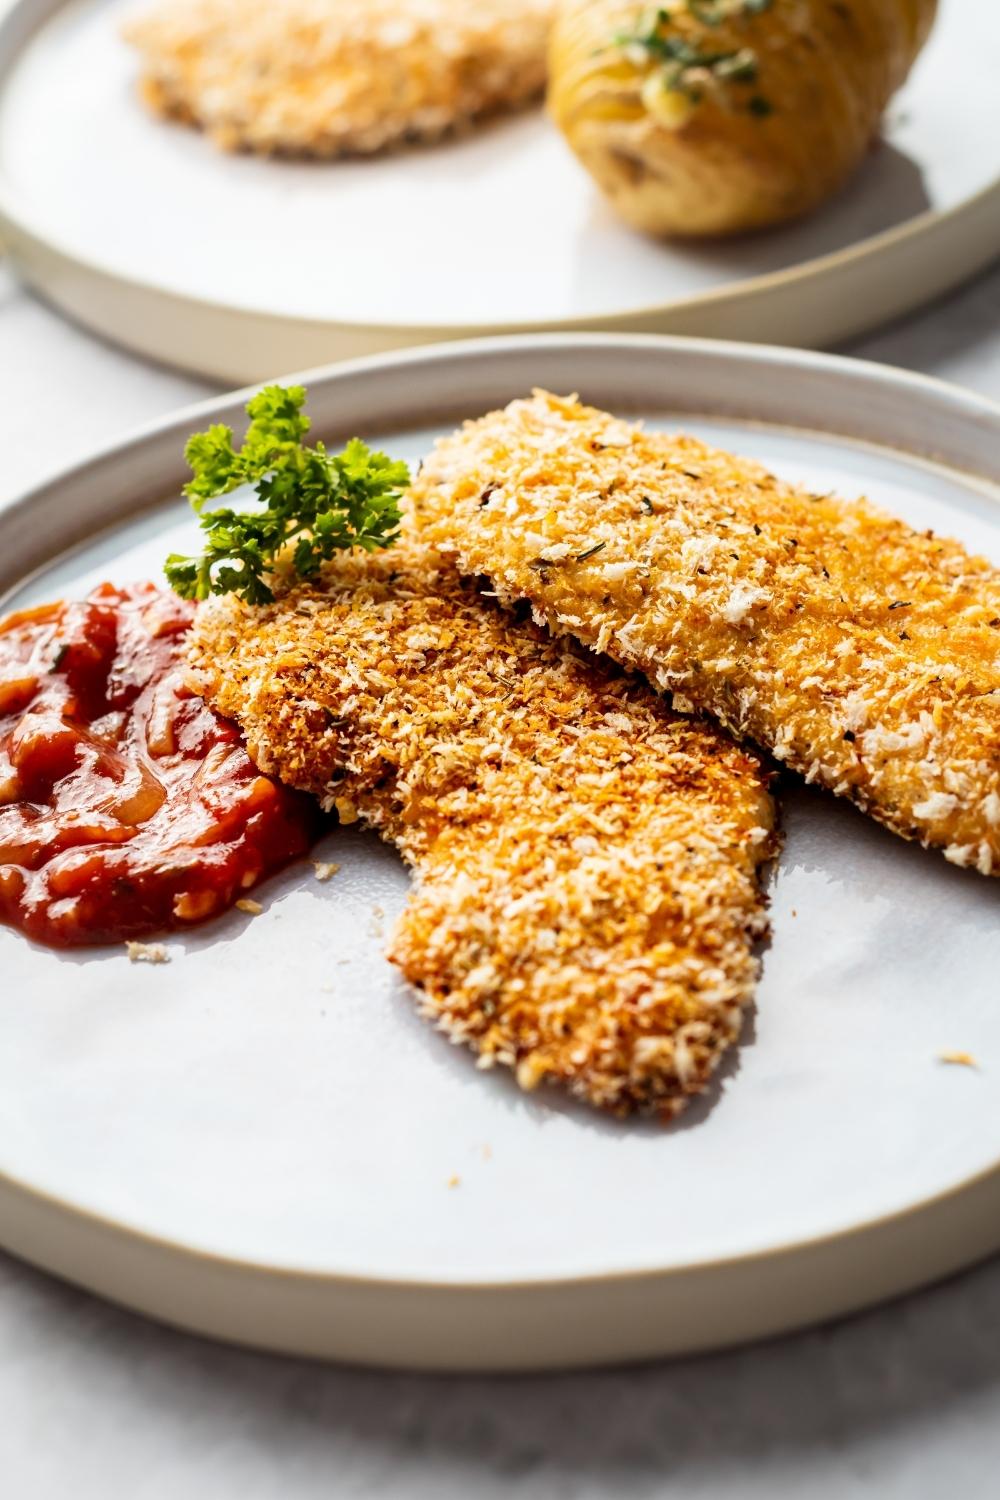 two pieces of panko breaded chicken on a white plate with a sprig of parsley and some marinara sauce